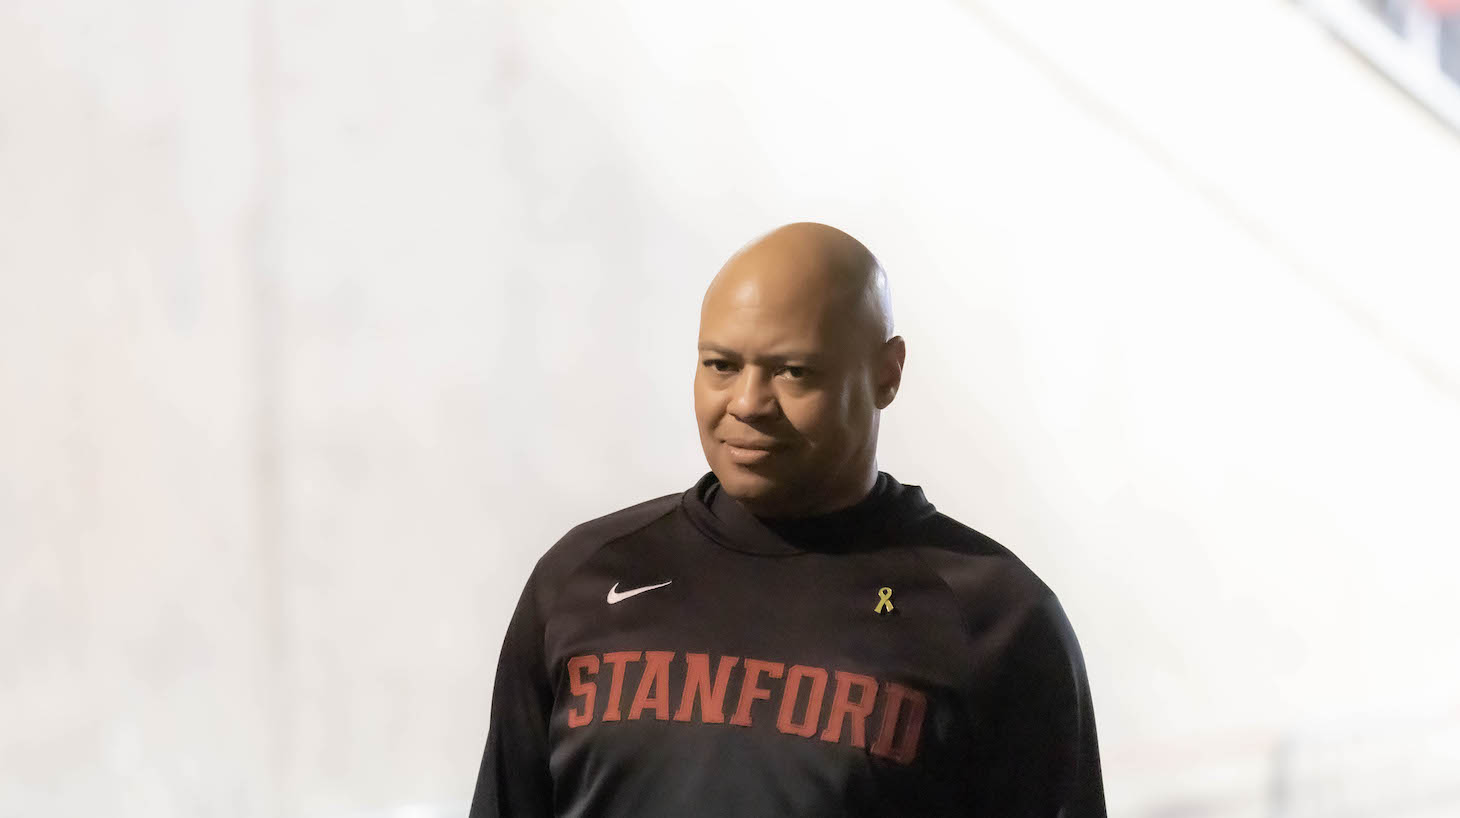 Head Coach David Shaw of the Stanford Cardinal waits to enter the stadium before an NCAA college football game against the BYU Cougars on November 26, 2022 at Stanford Stadium in Palo Alto, California.